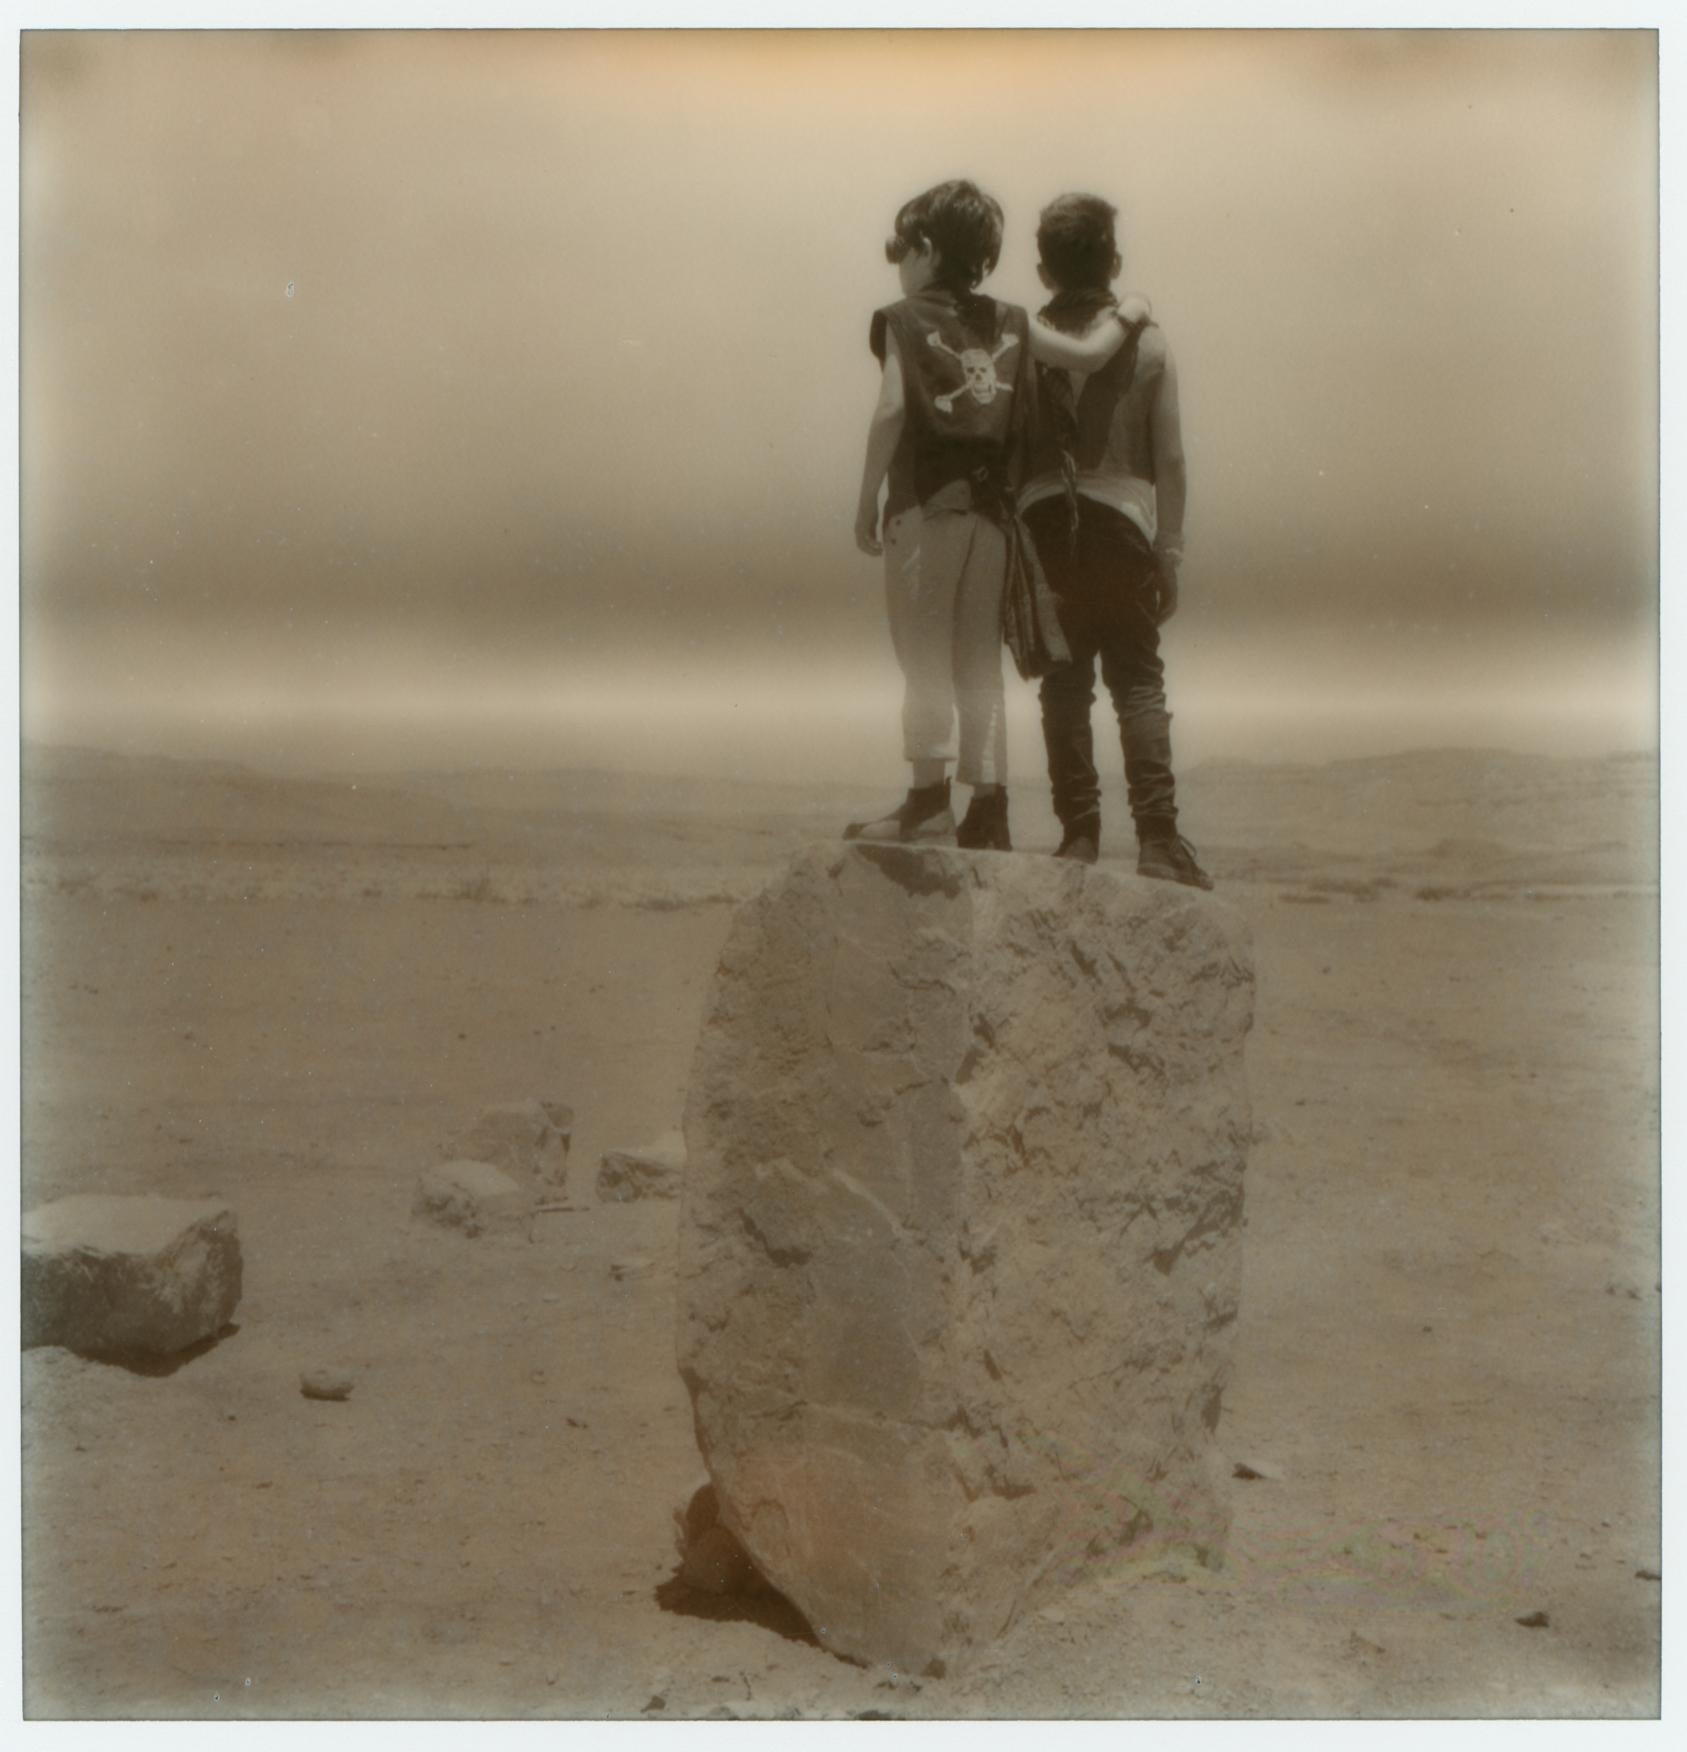 It's only You and Me now (2) -  21st Century, Contemporary, Polaroid, Boyhood